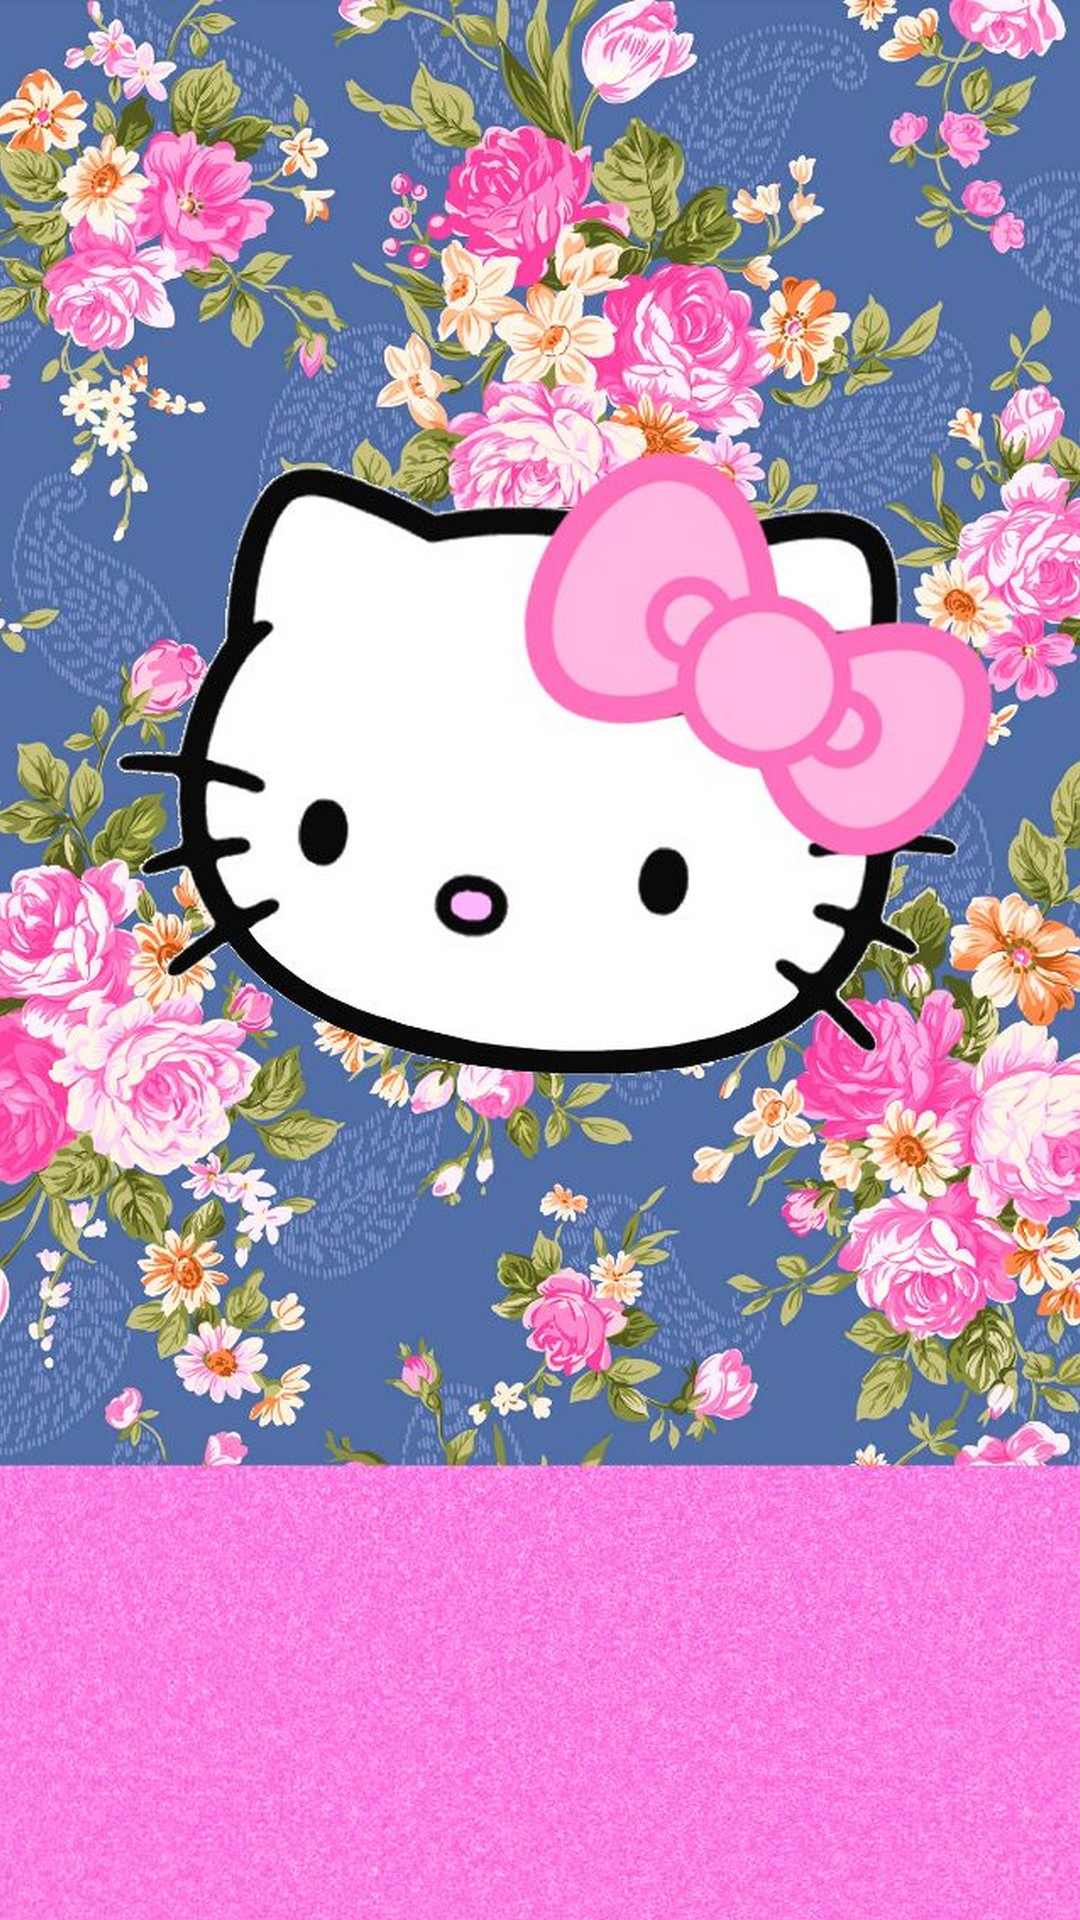 Wallpaper Hello Kitty Image Android